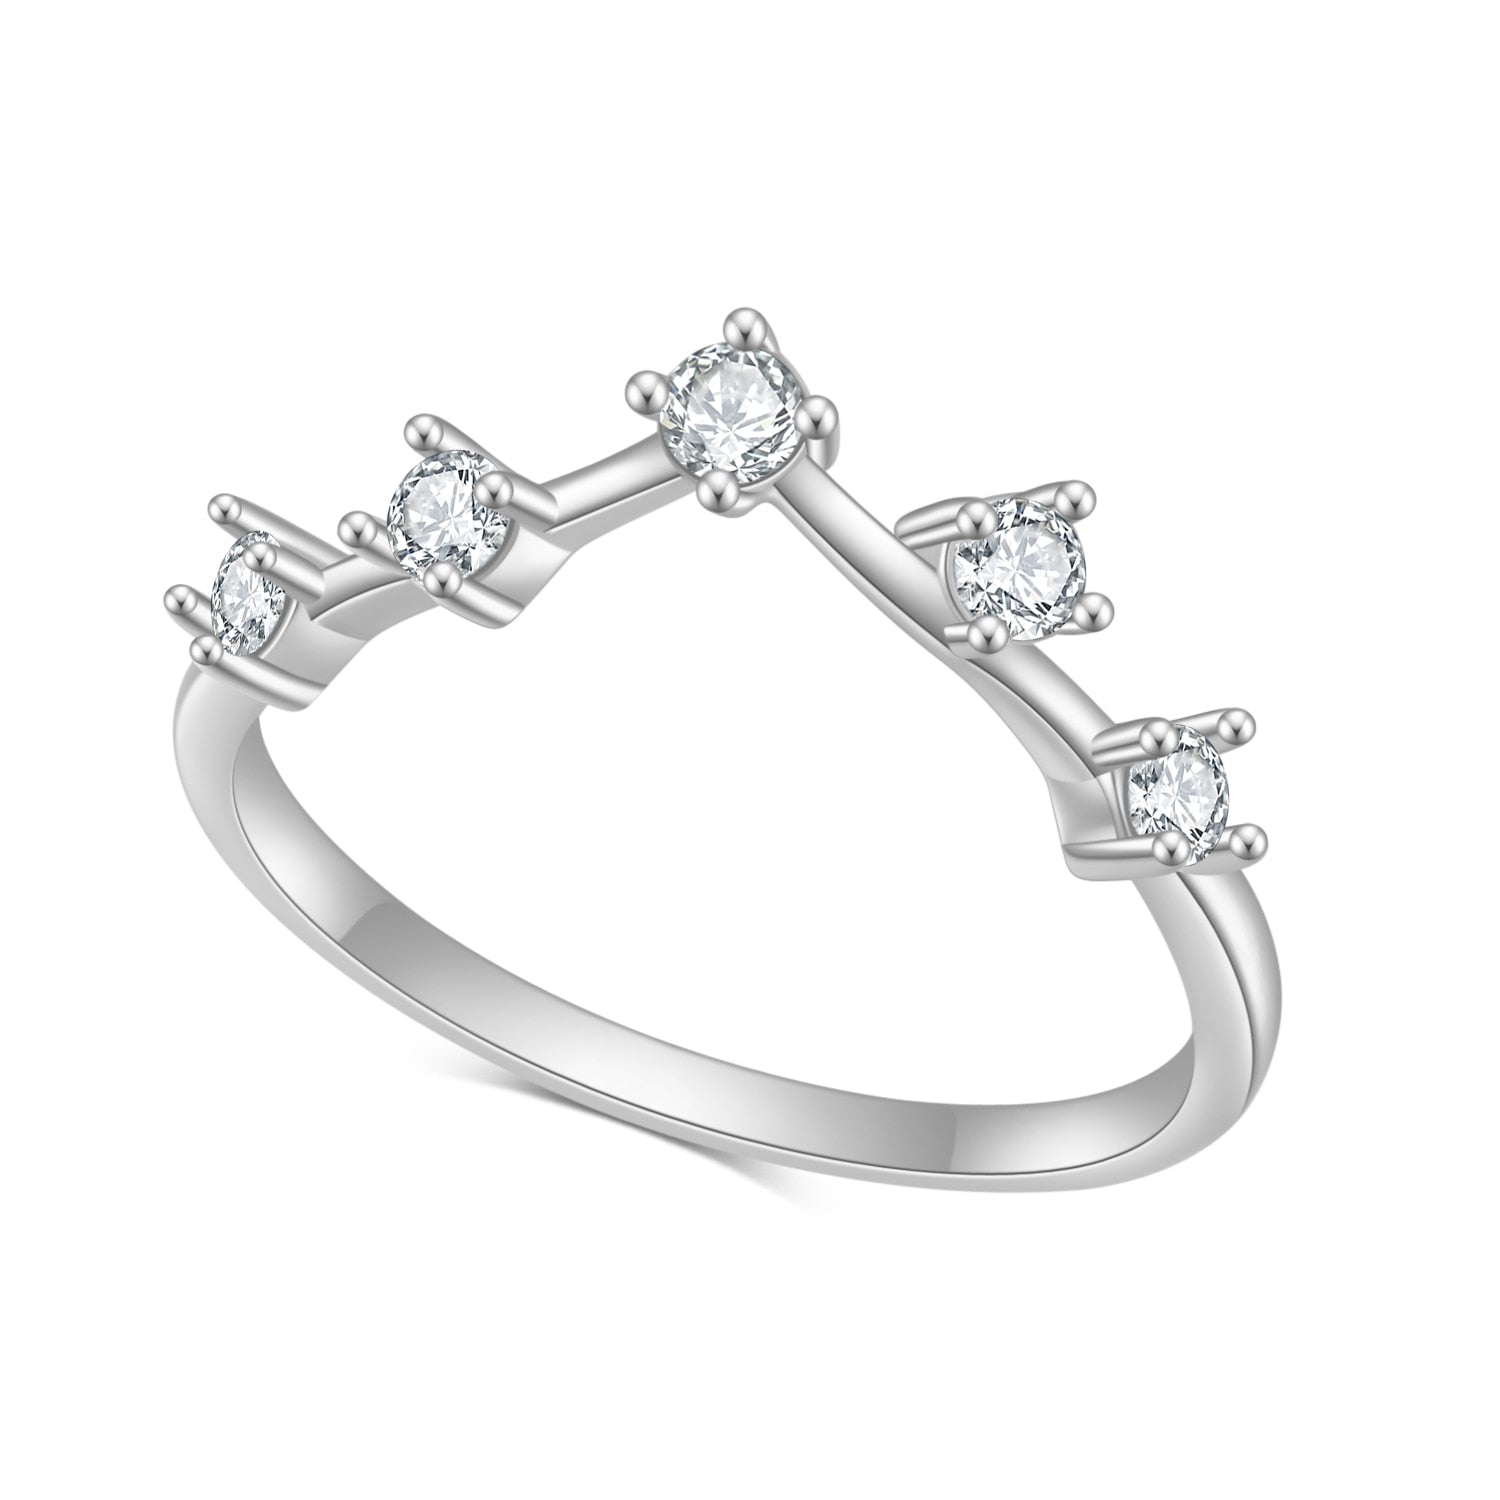 A silver chevron style wedding ring set with 5 small round spaced apart moissanites.